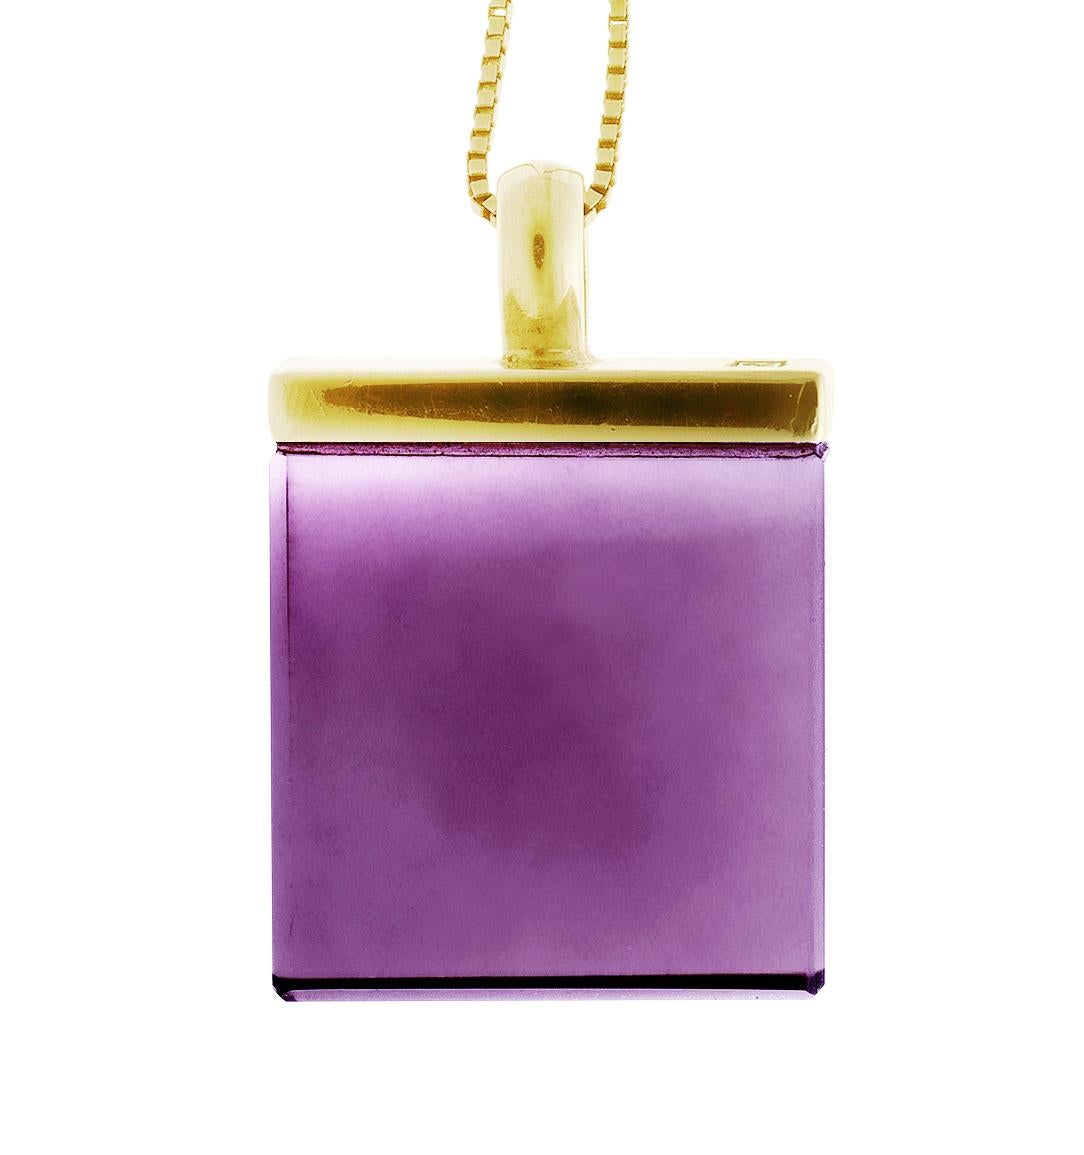 This 14 karat yellow gold pendant necklace features a large 15x15x8 mm grown amethyst, specially cut for the artist. It is part of the Ink collection, which has been featured in publications such as Harper's Bazaar and Vogue UA.

The gemstone has an